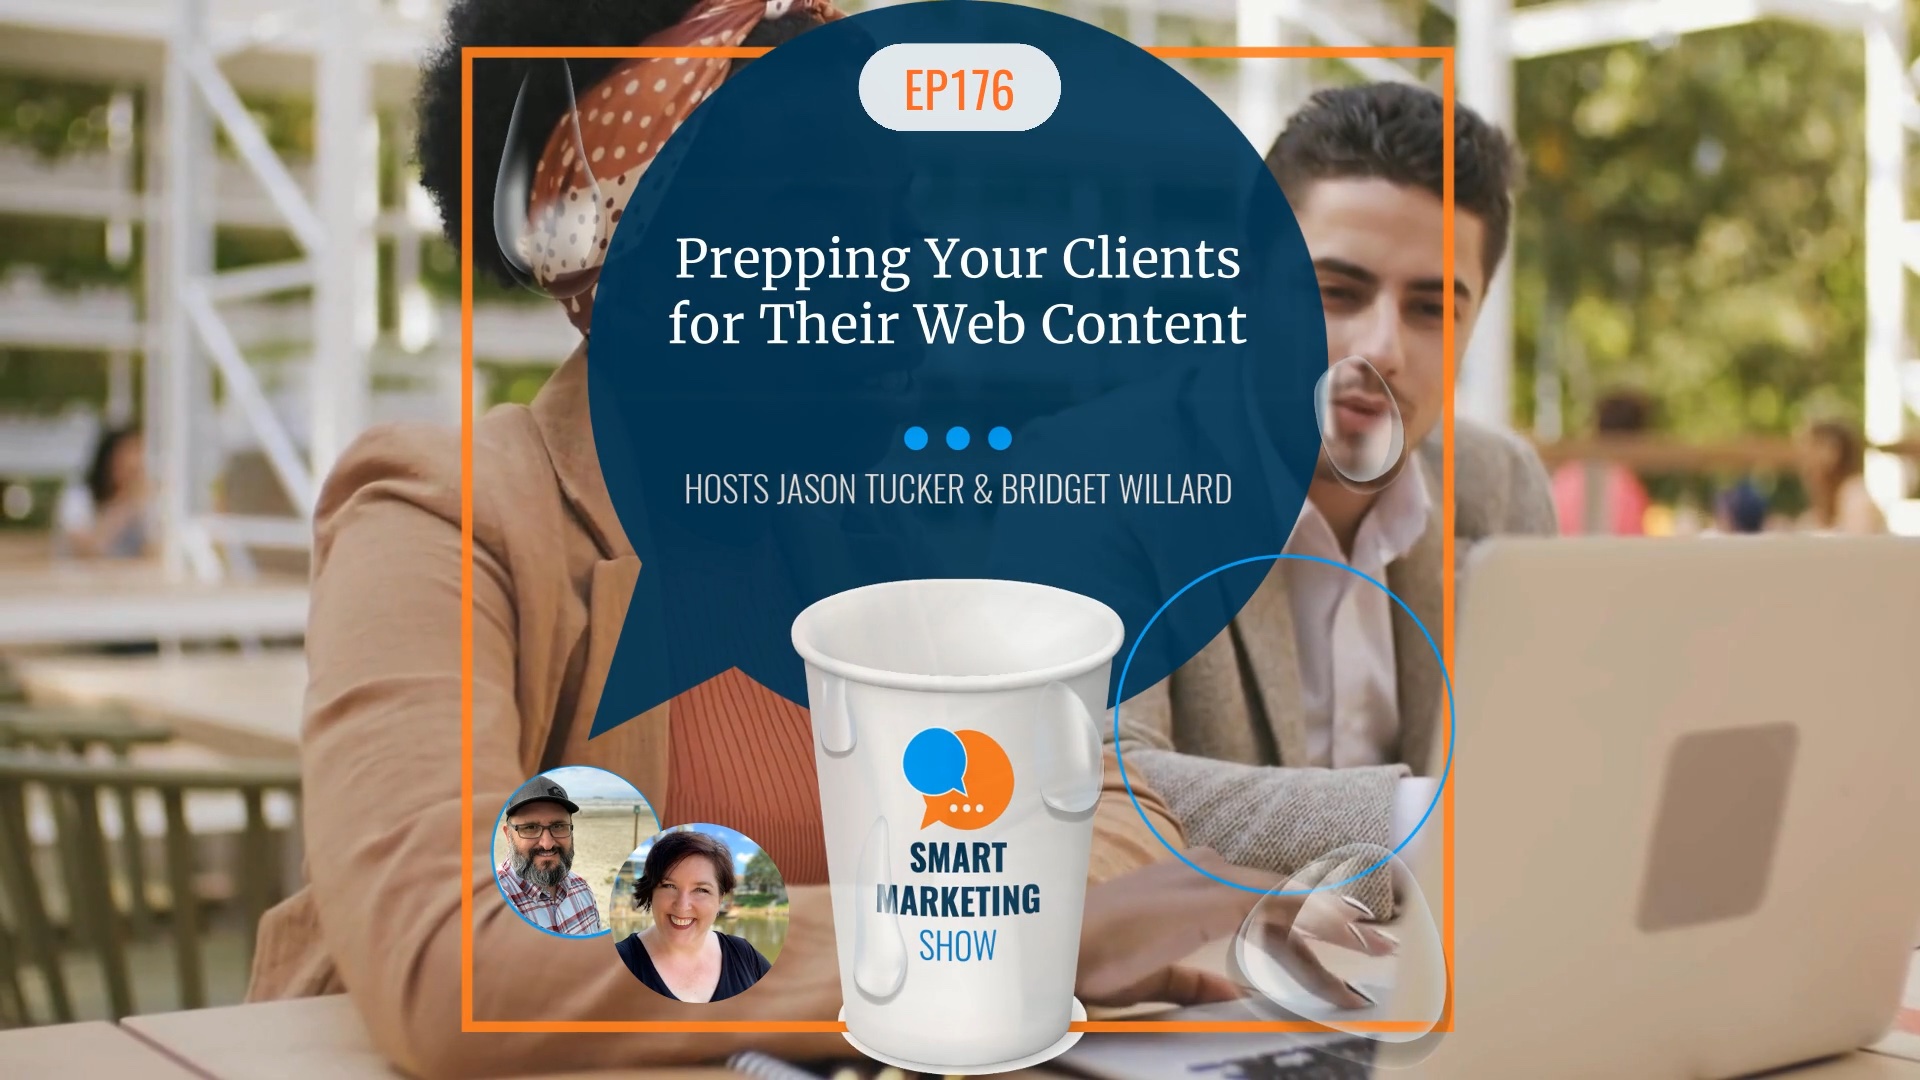 EP176 – Prepping Your Clients for Their Web Content